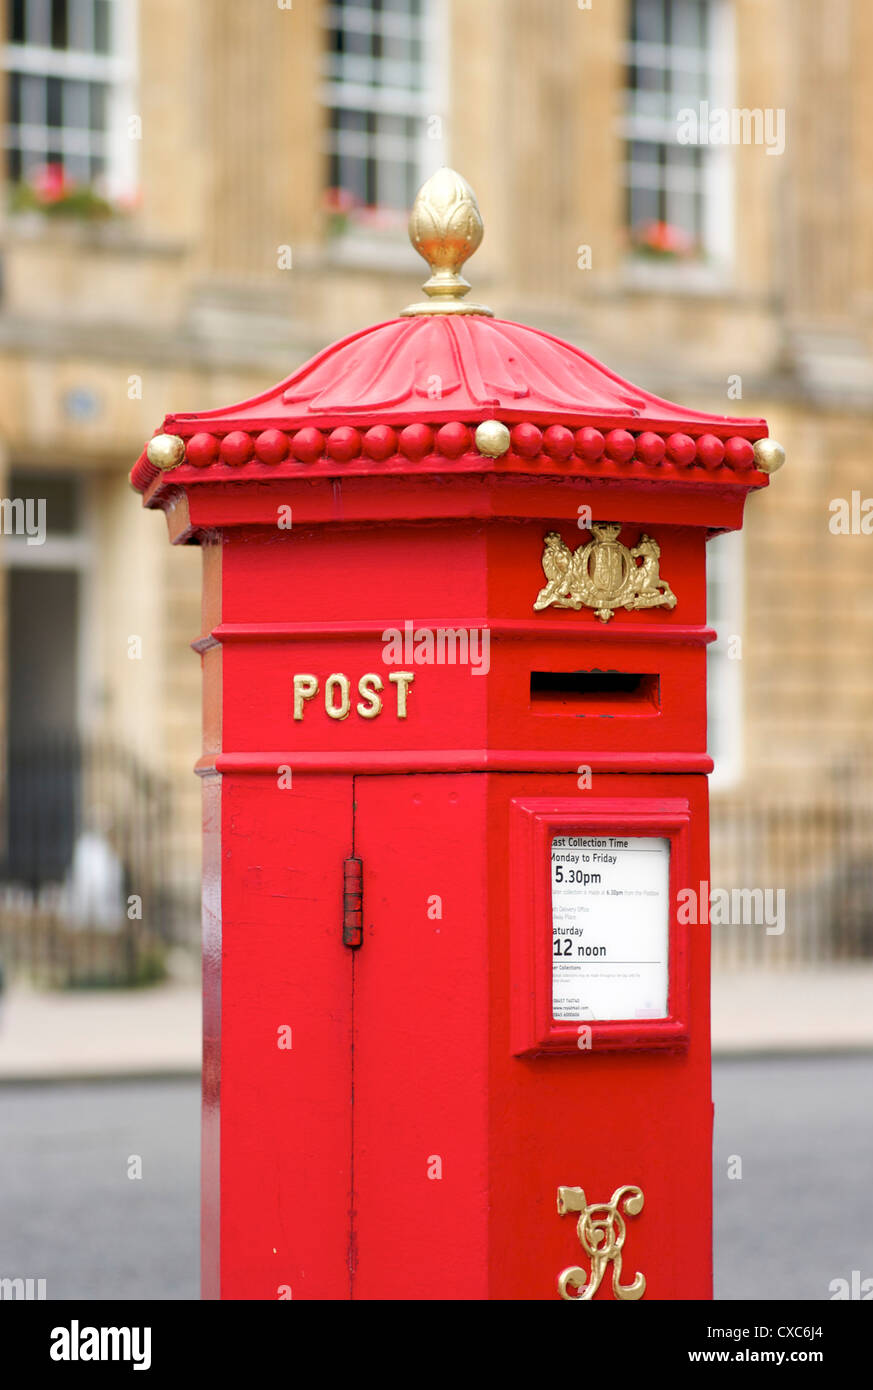 Post Box England High Resolution Stock Photography and Images - Alamy